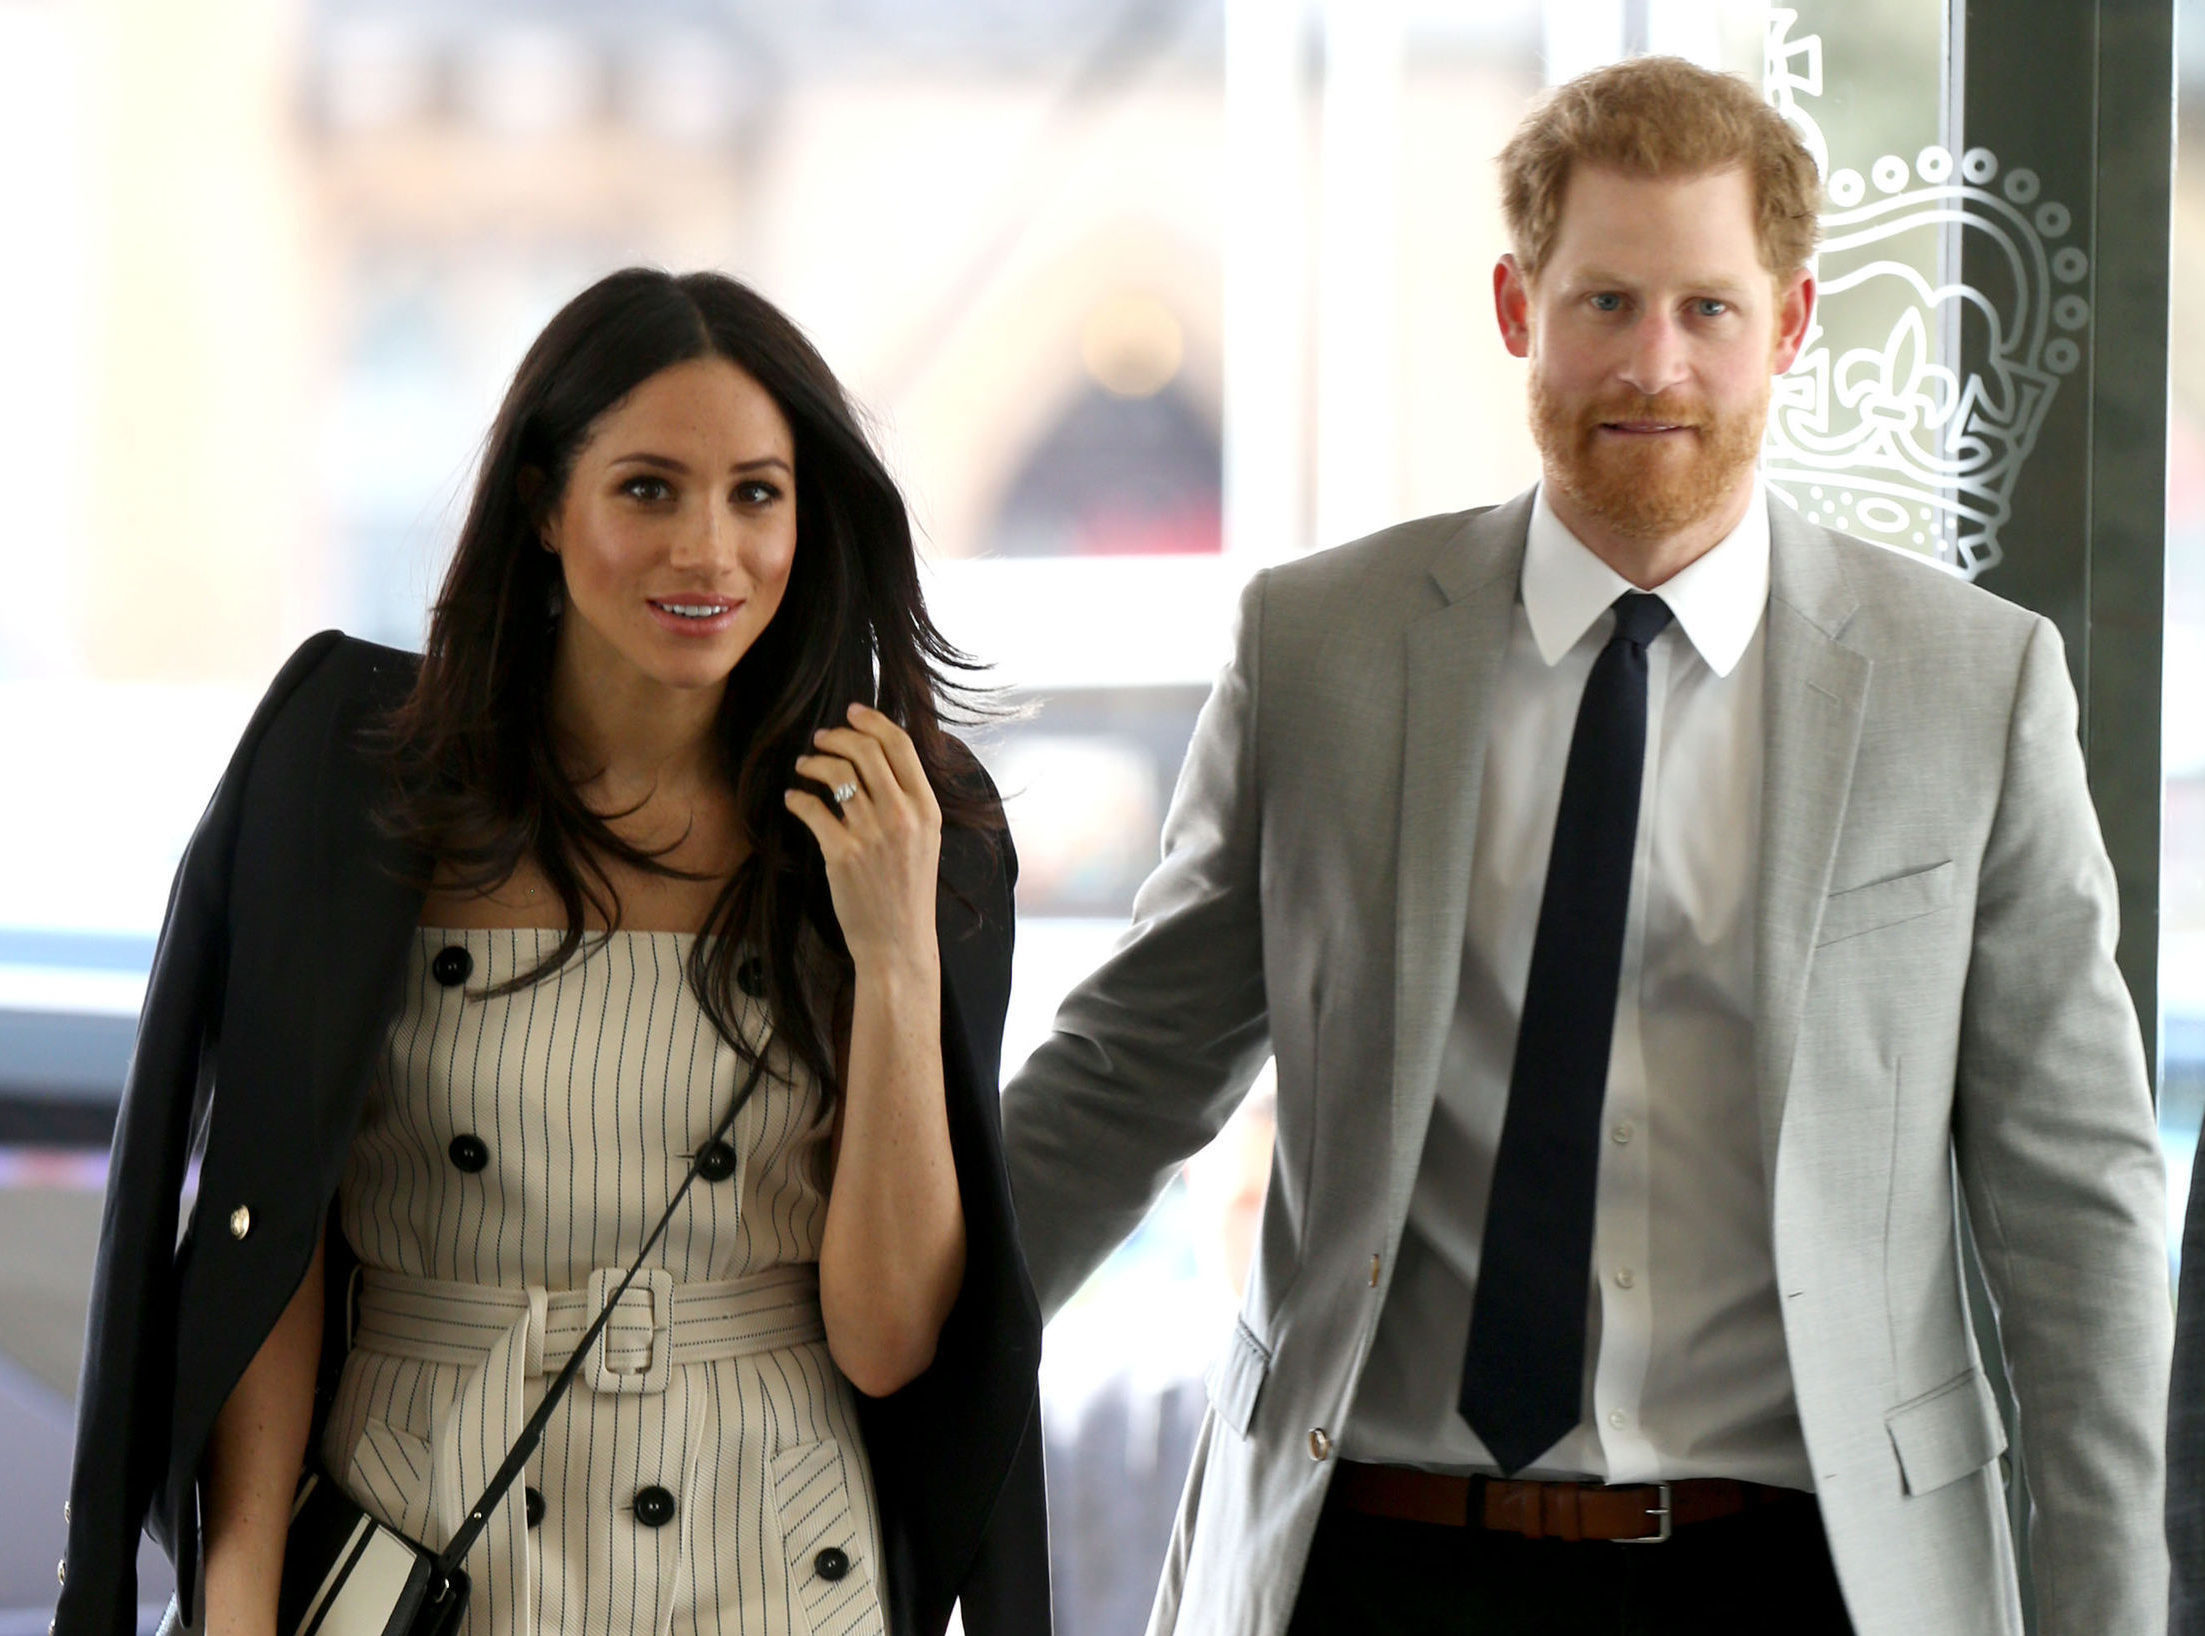 Meghan Markle and Prince Harry arrive at the Queen Elizabeth II Conference Centre in London (Yui Mok/PA)